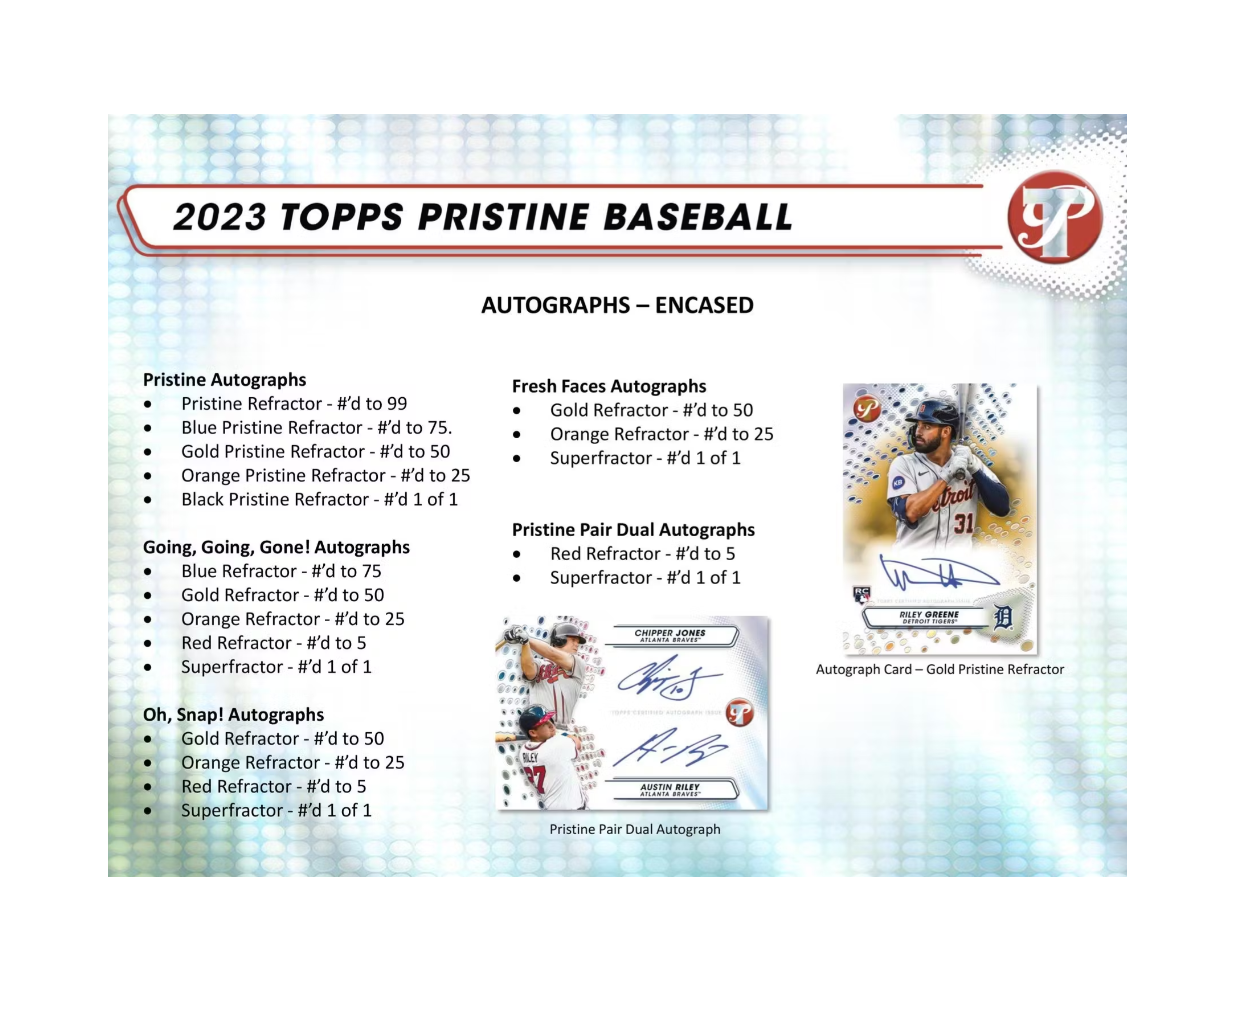 2023 Topps Pristine Baseball Hobby Box | The Awesome Card Shop